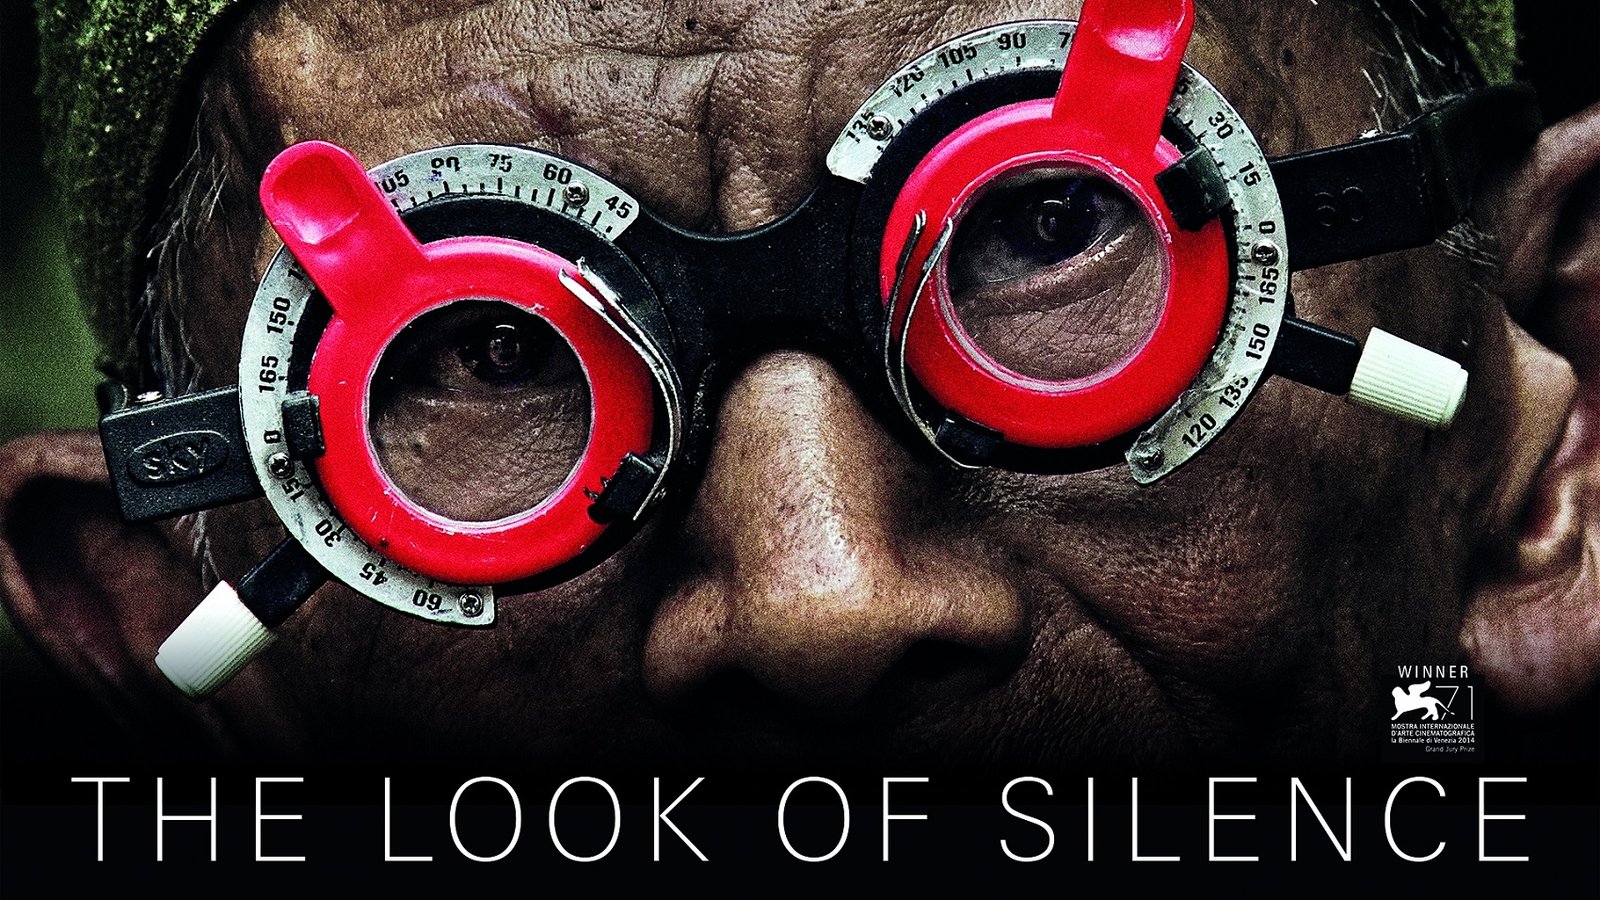 The Look of Silence - An Indonesian Man Confronts the Men Who Killed his Brother